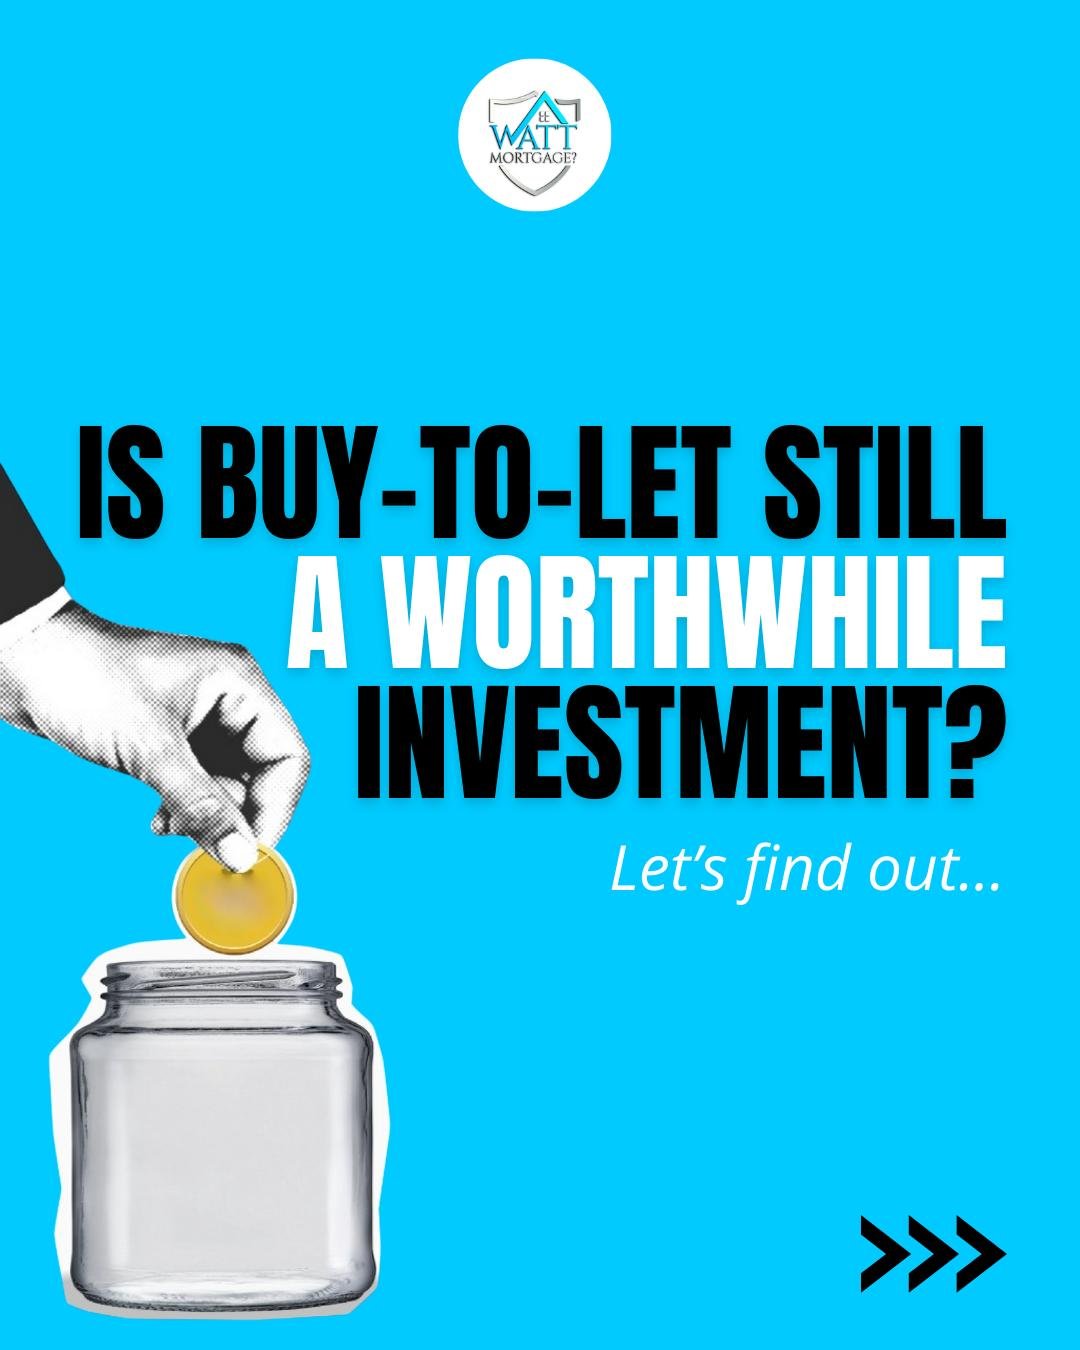 Is buy-to-let still a worthwhile investment? 🏘

Let's find out...

✅Potential for high rental income, with some areas in the UK offering up to 8% rental yield.
✅Opportunity for capital growth as the value of the property increases.
✅Option to insure